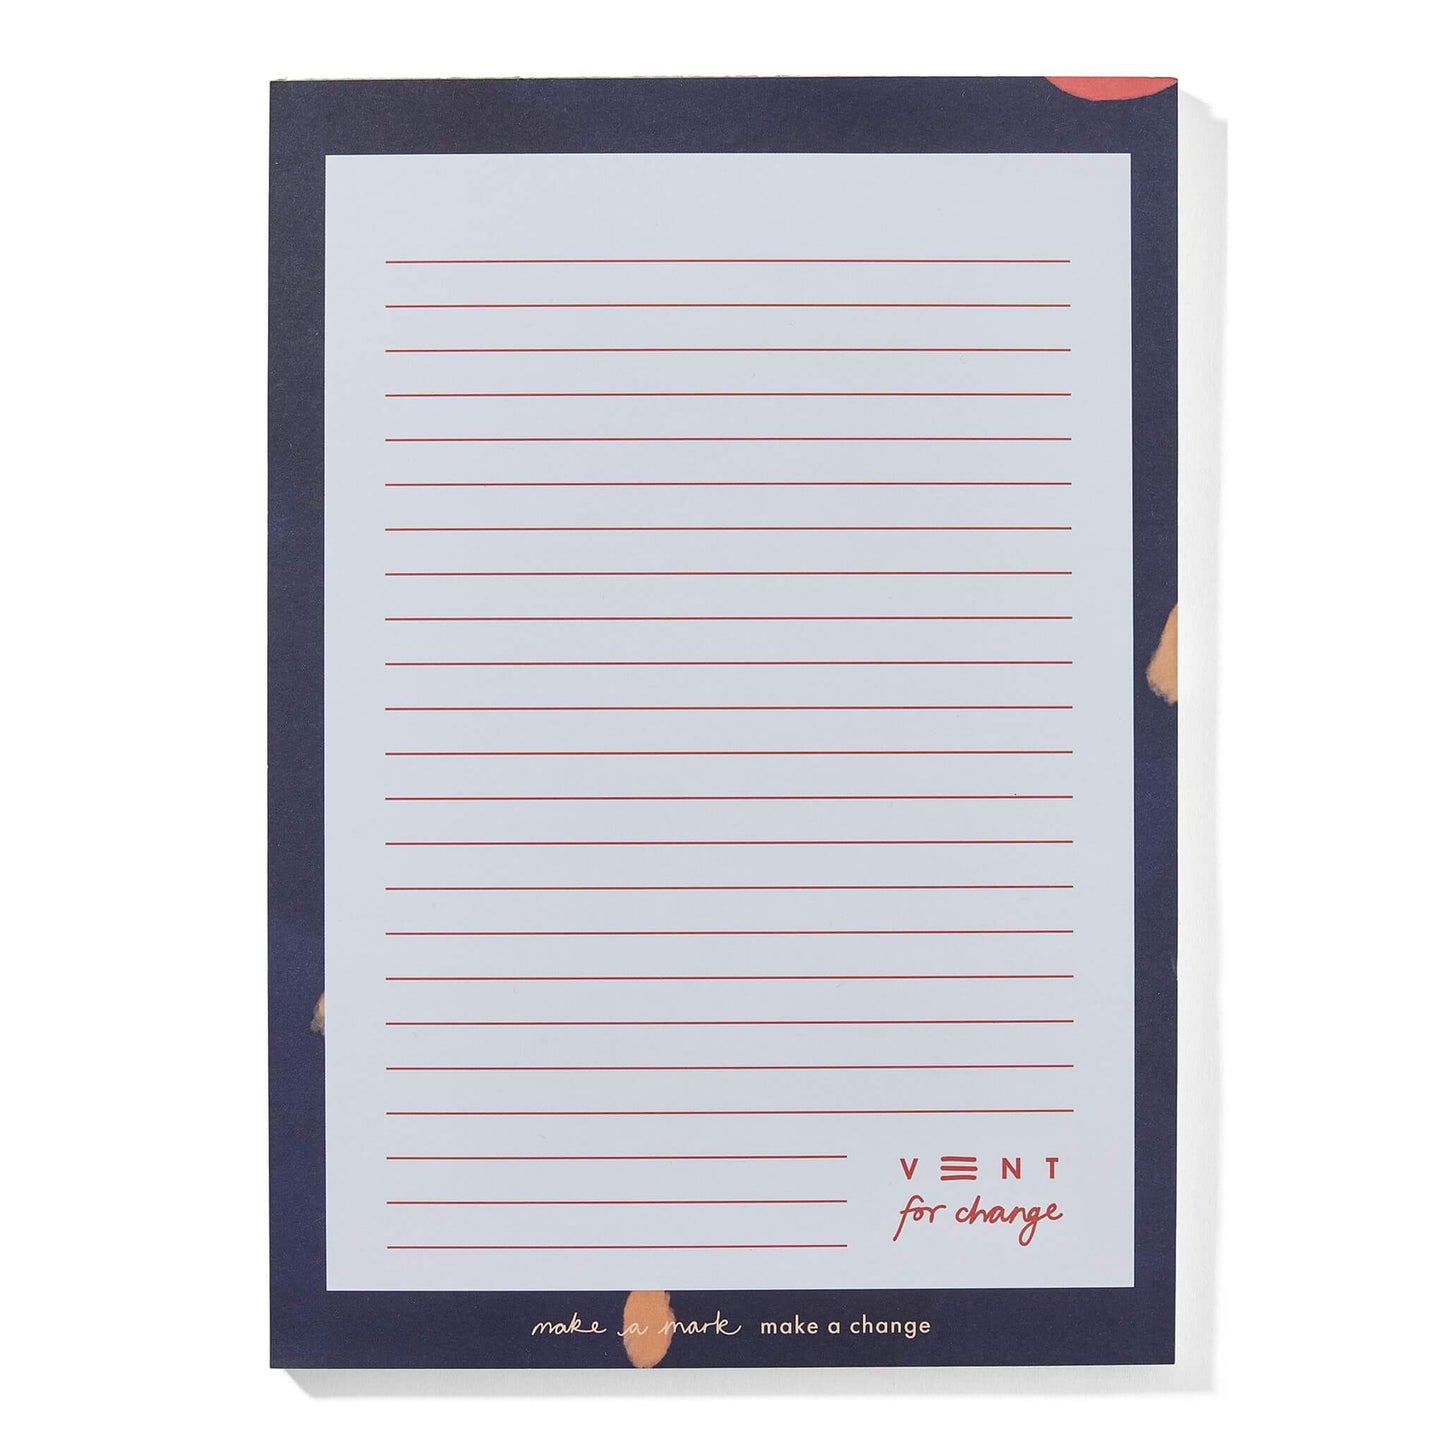 Ideas A5 Notepad  Recycled & Sustainable - blue